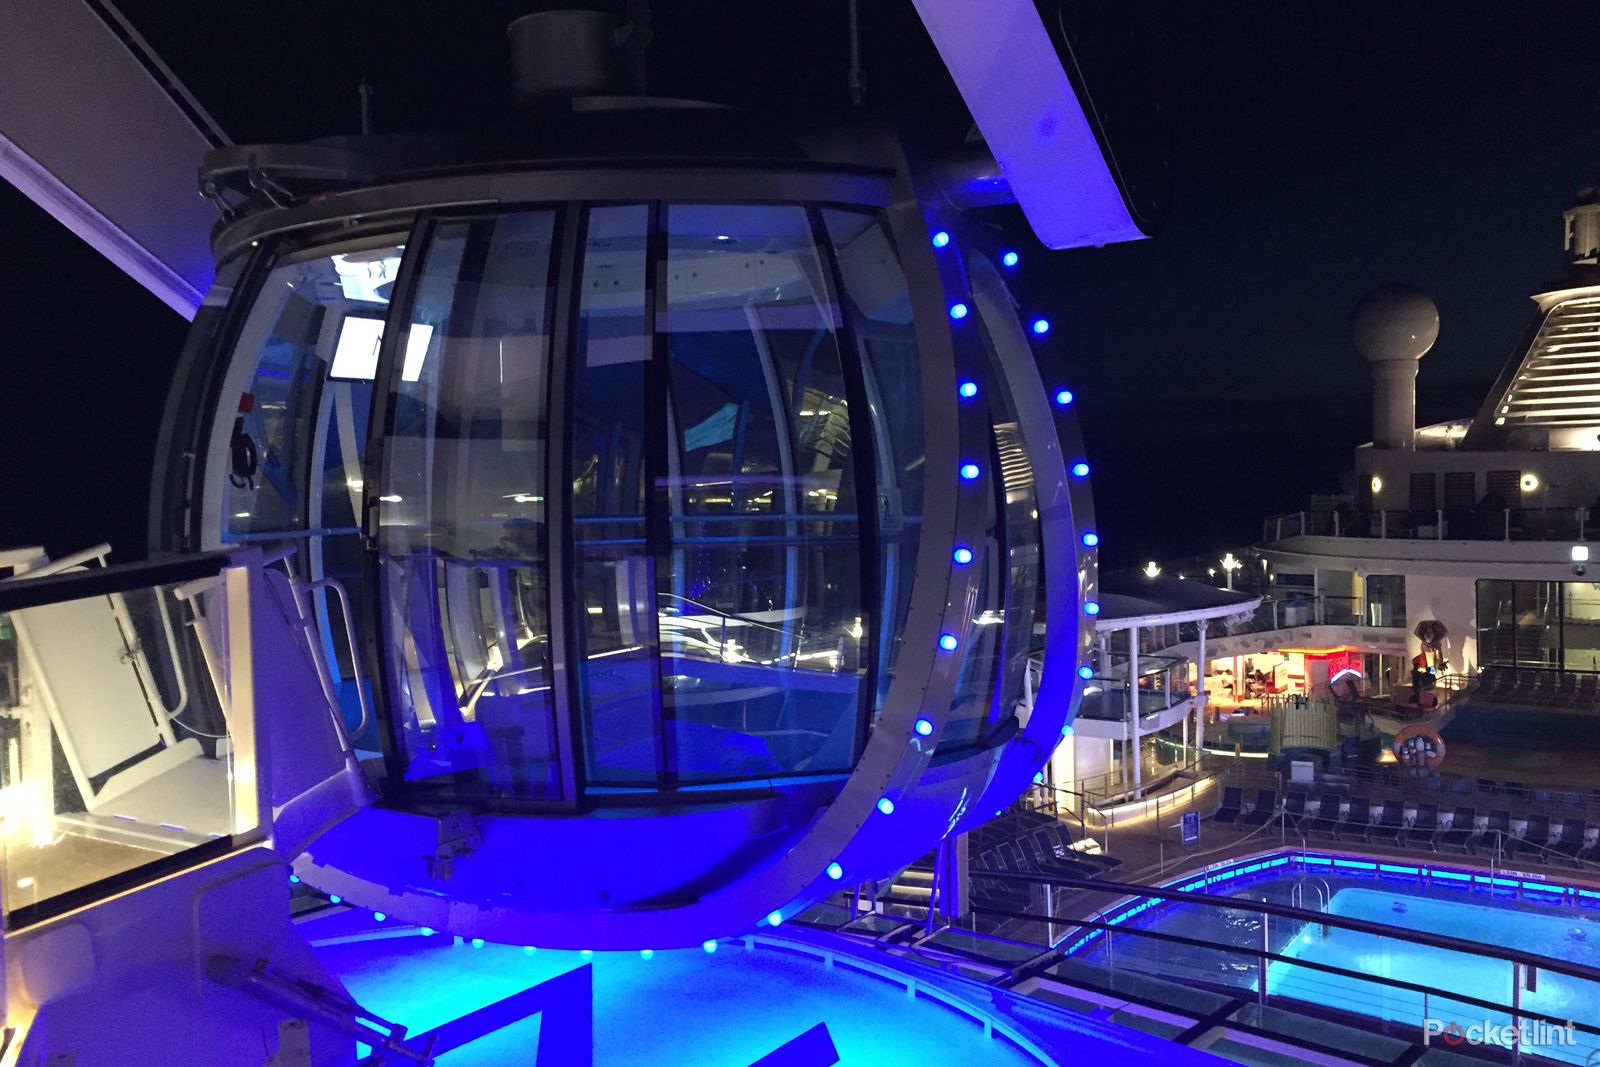 royal caribbean s quantum of the seas we step aboard the smartest ship afloat image 8